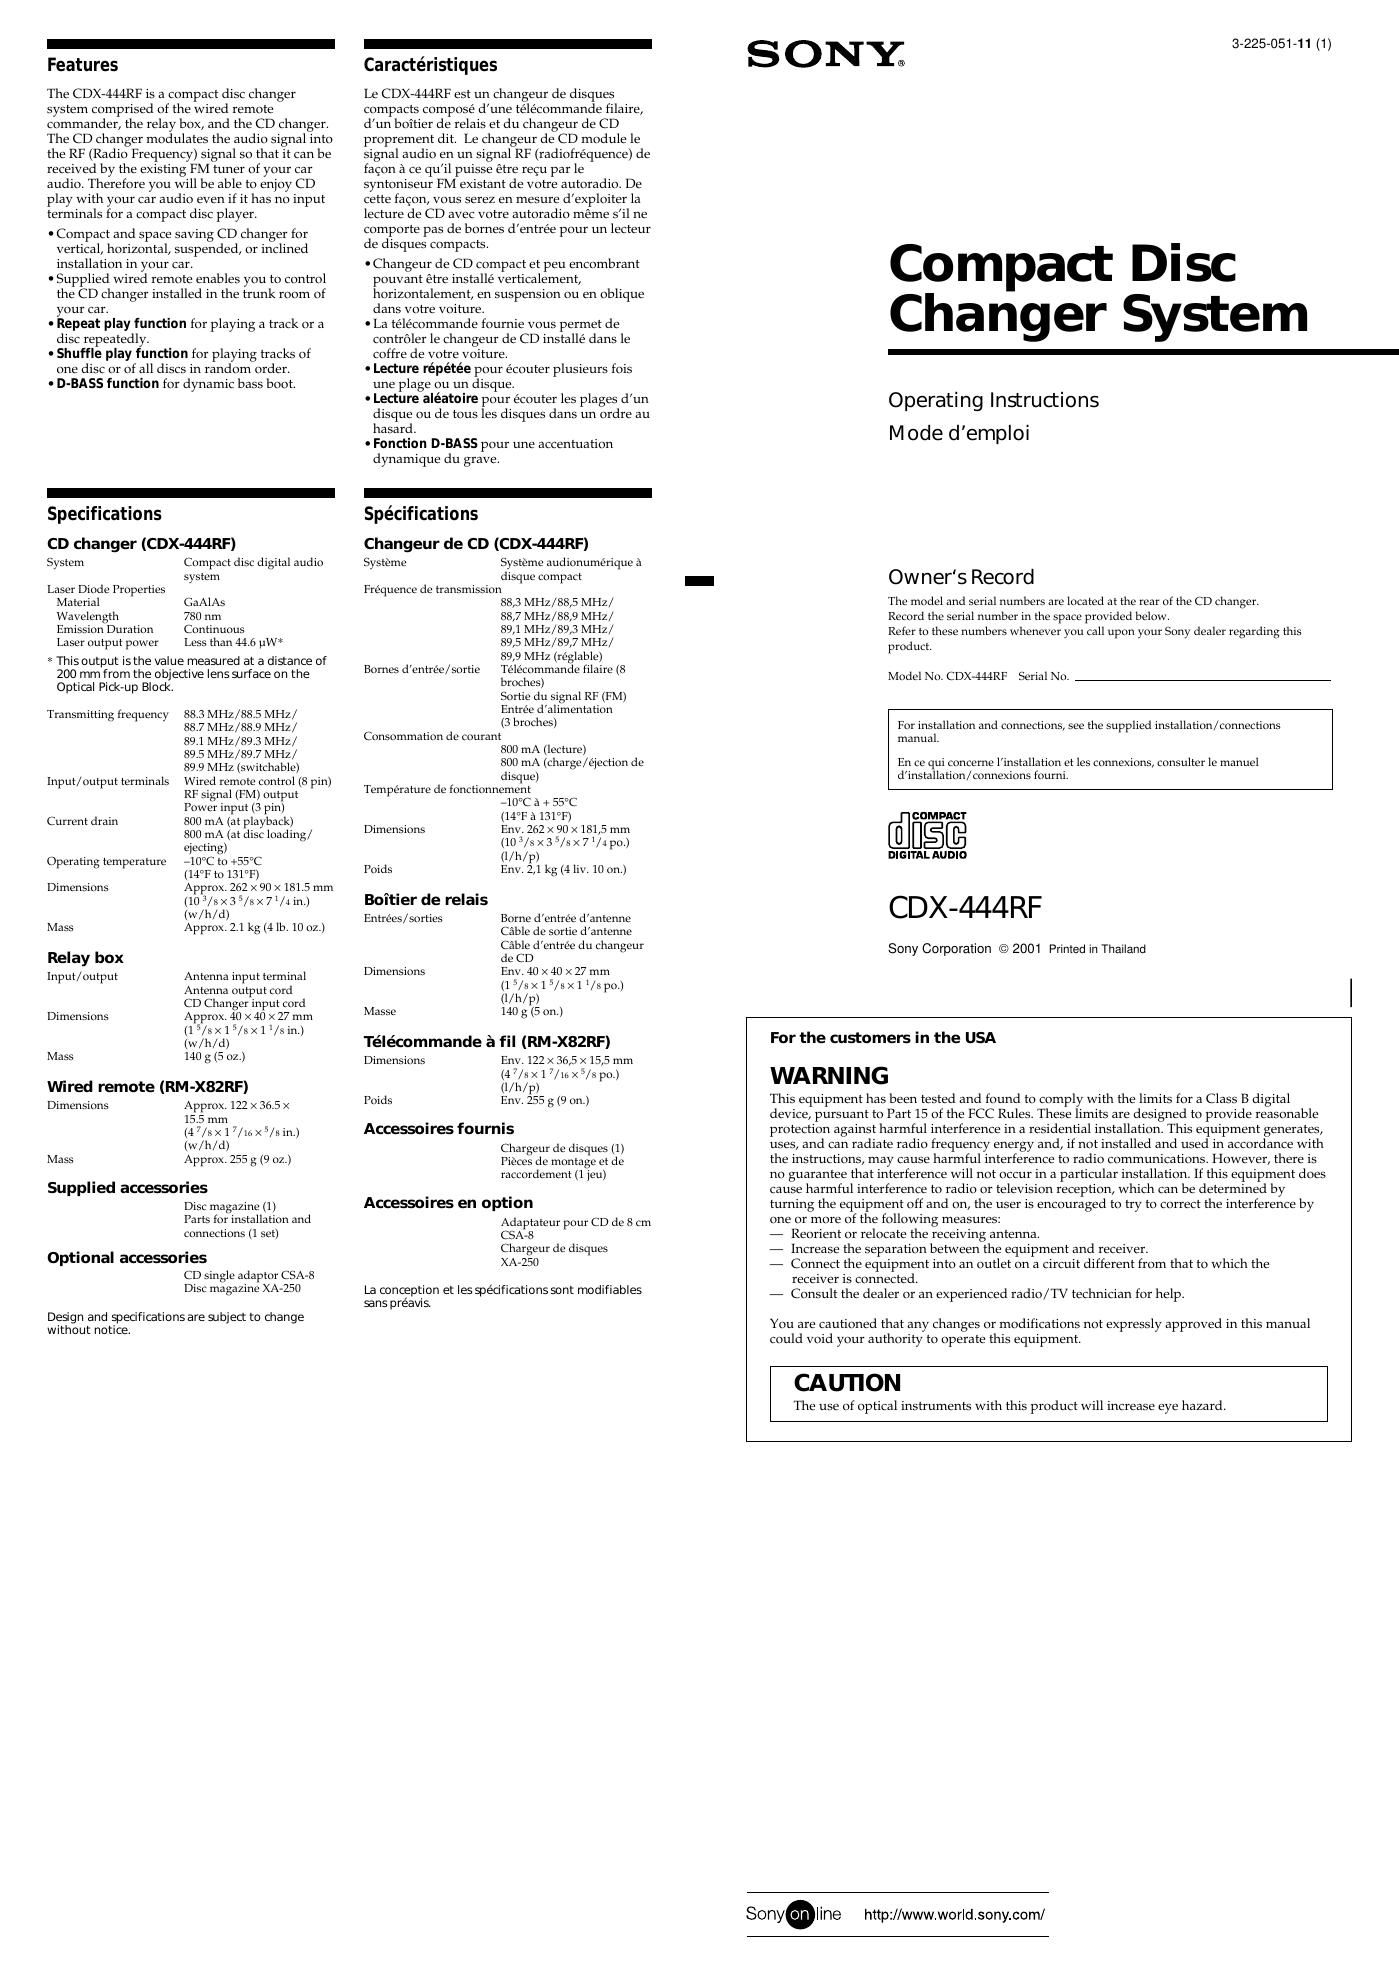 sony cdx 444 rf owners manual